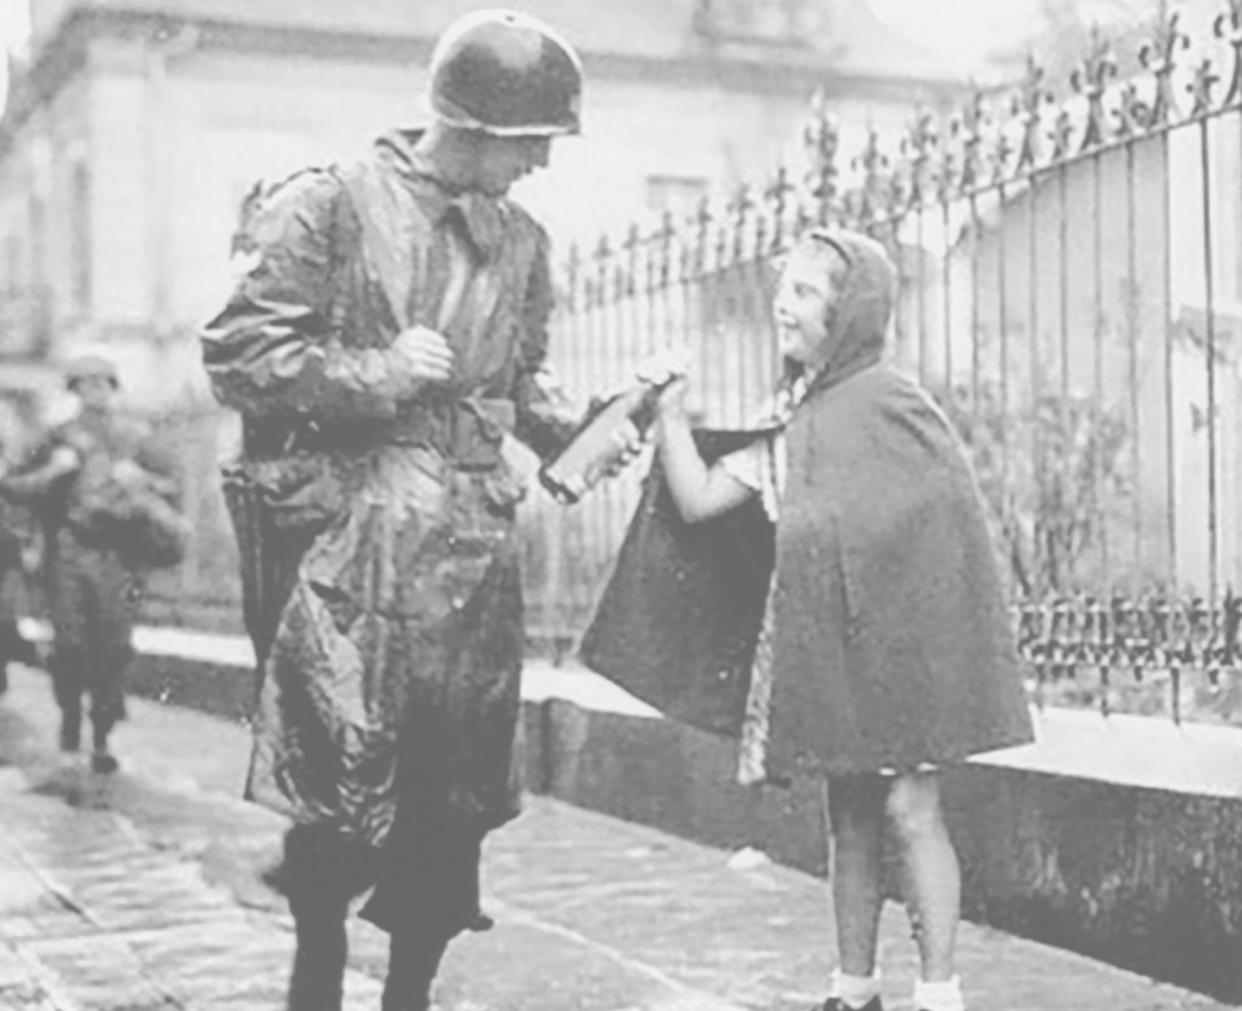 Robert Warren receiving a bottle of wine from a young girl in France. The photo was published in the Front Line News. The French people shared hidden caches of vintage wine when they were liberated.